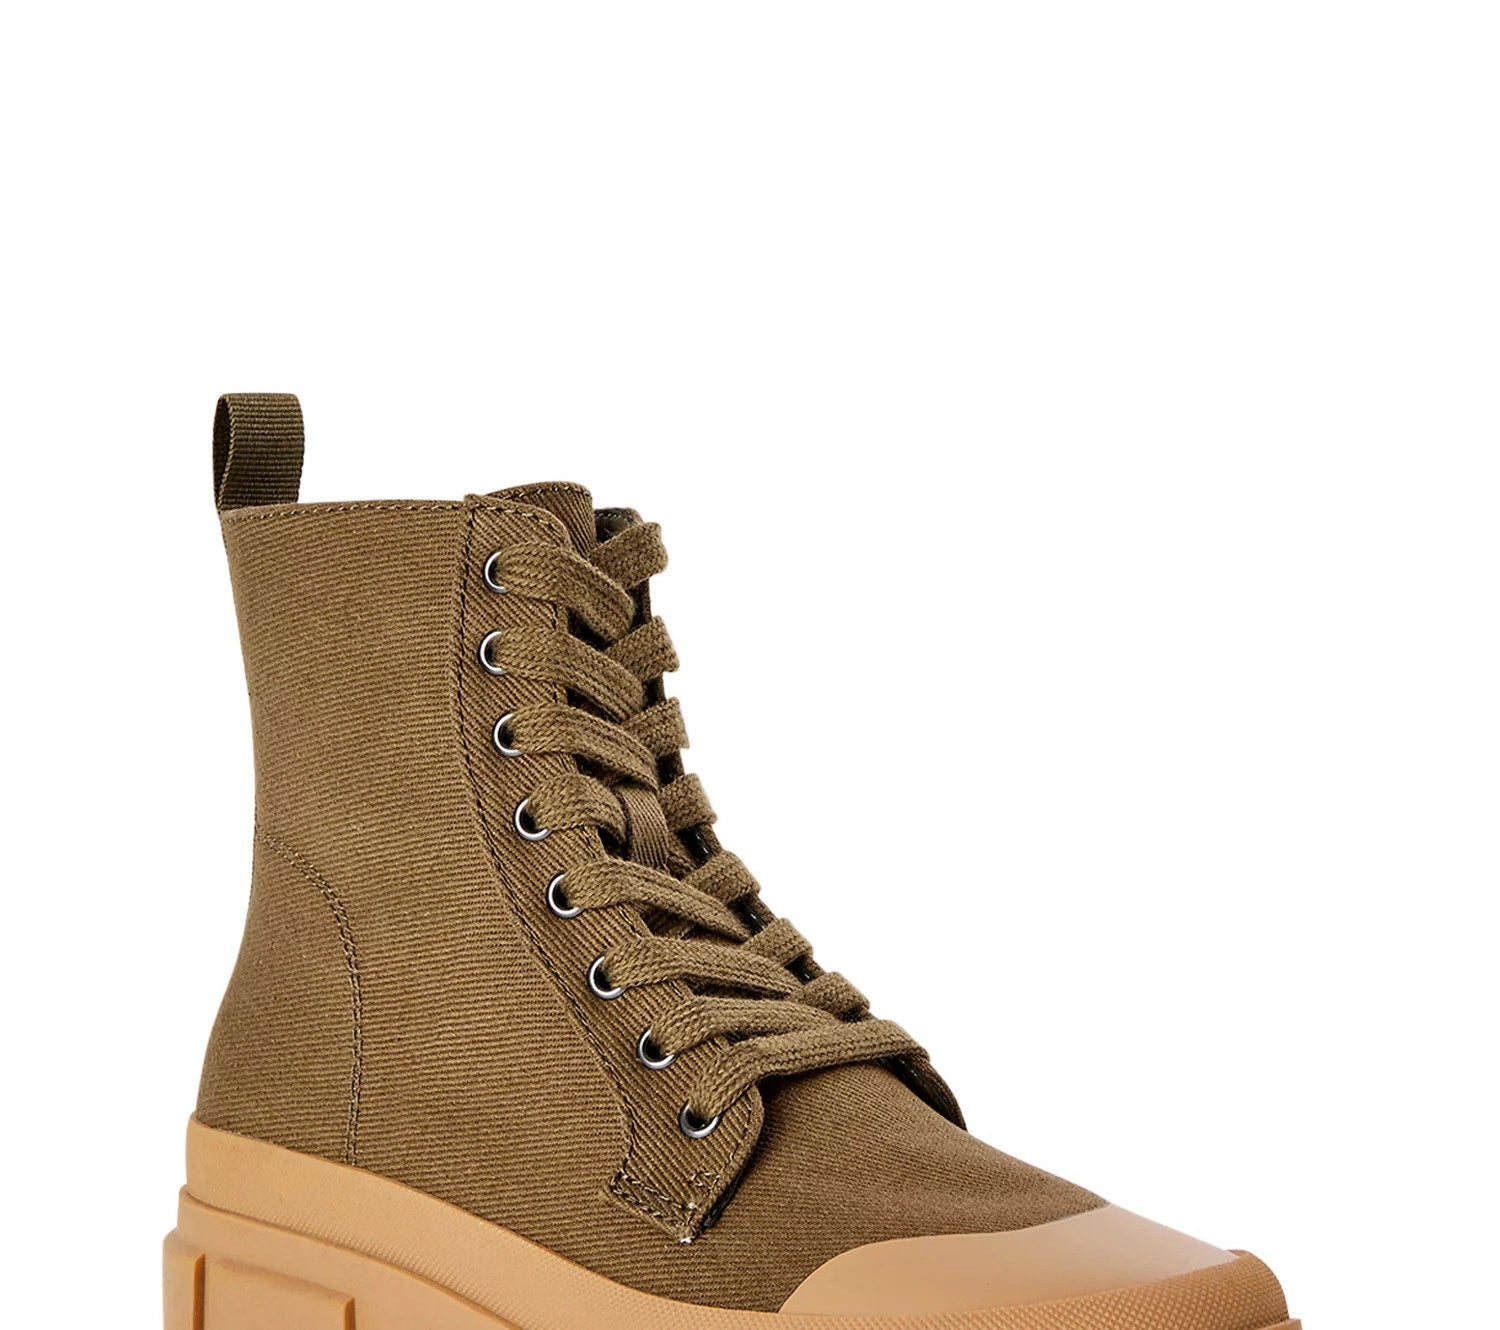 The olive boot